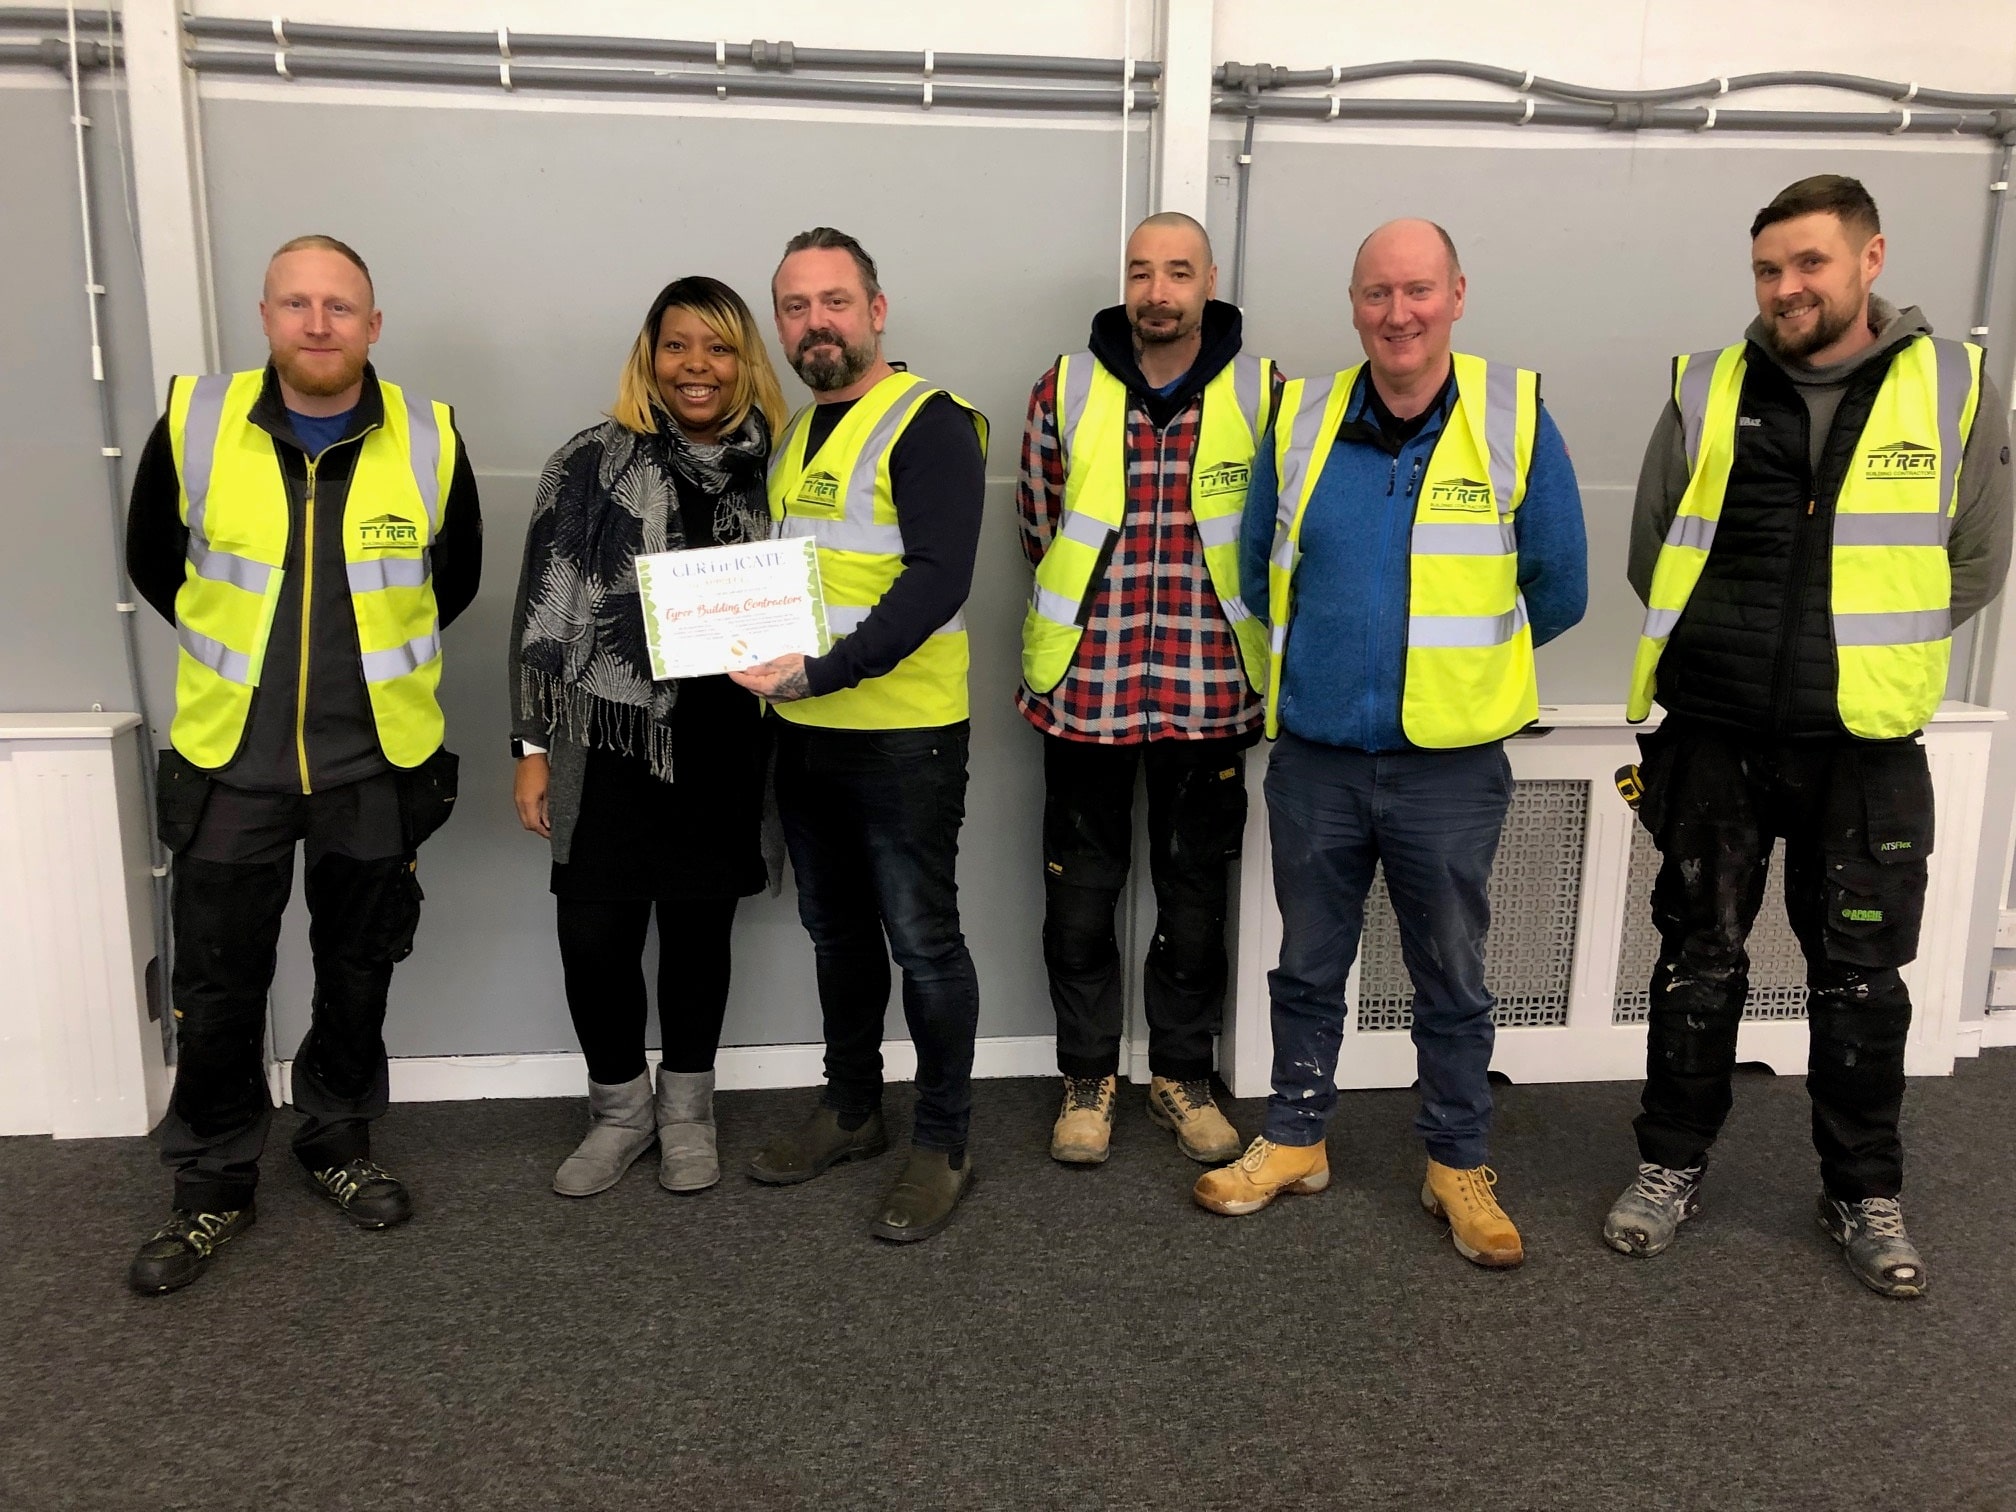 Tyrer Building Contractors get their certificate from Kelly Cranston